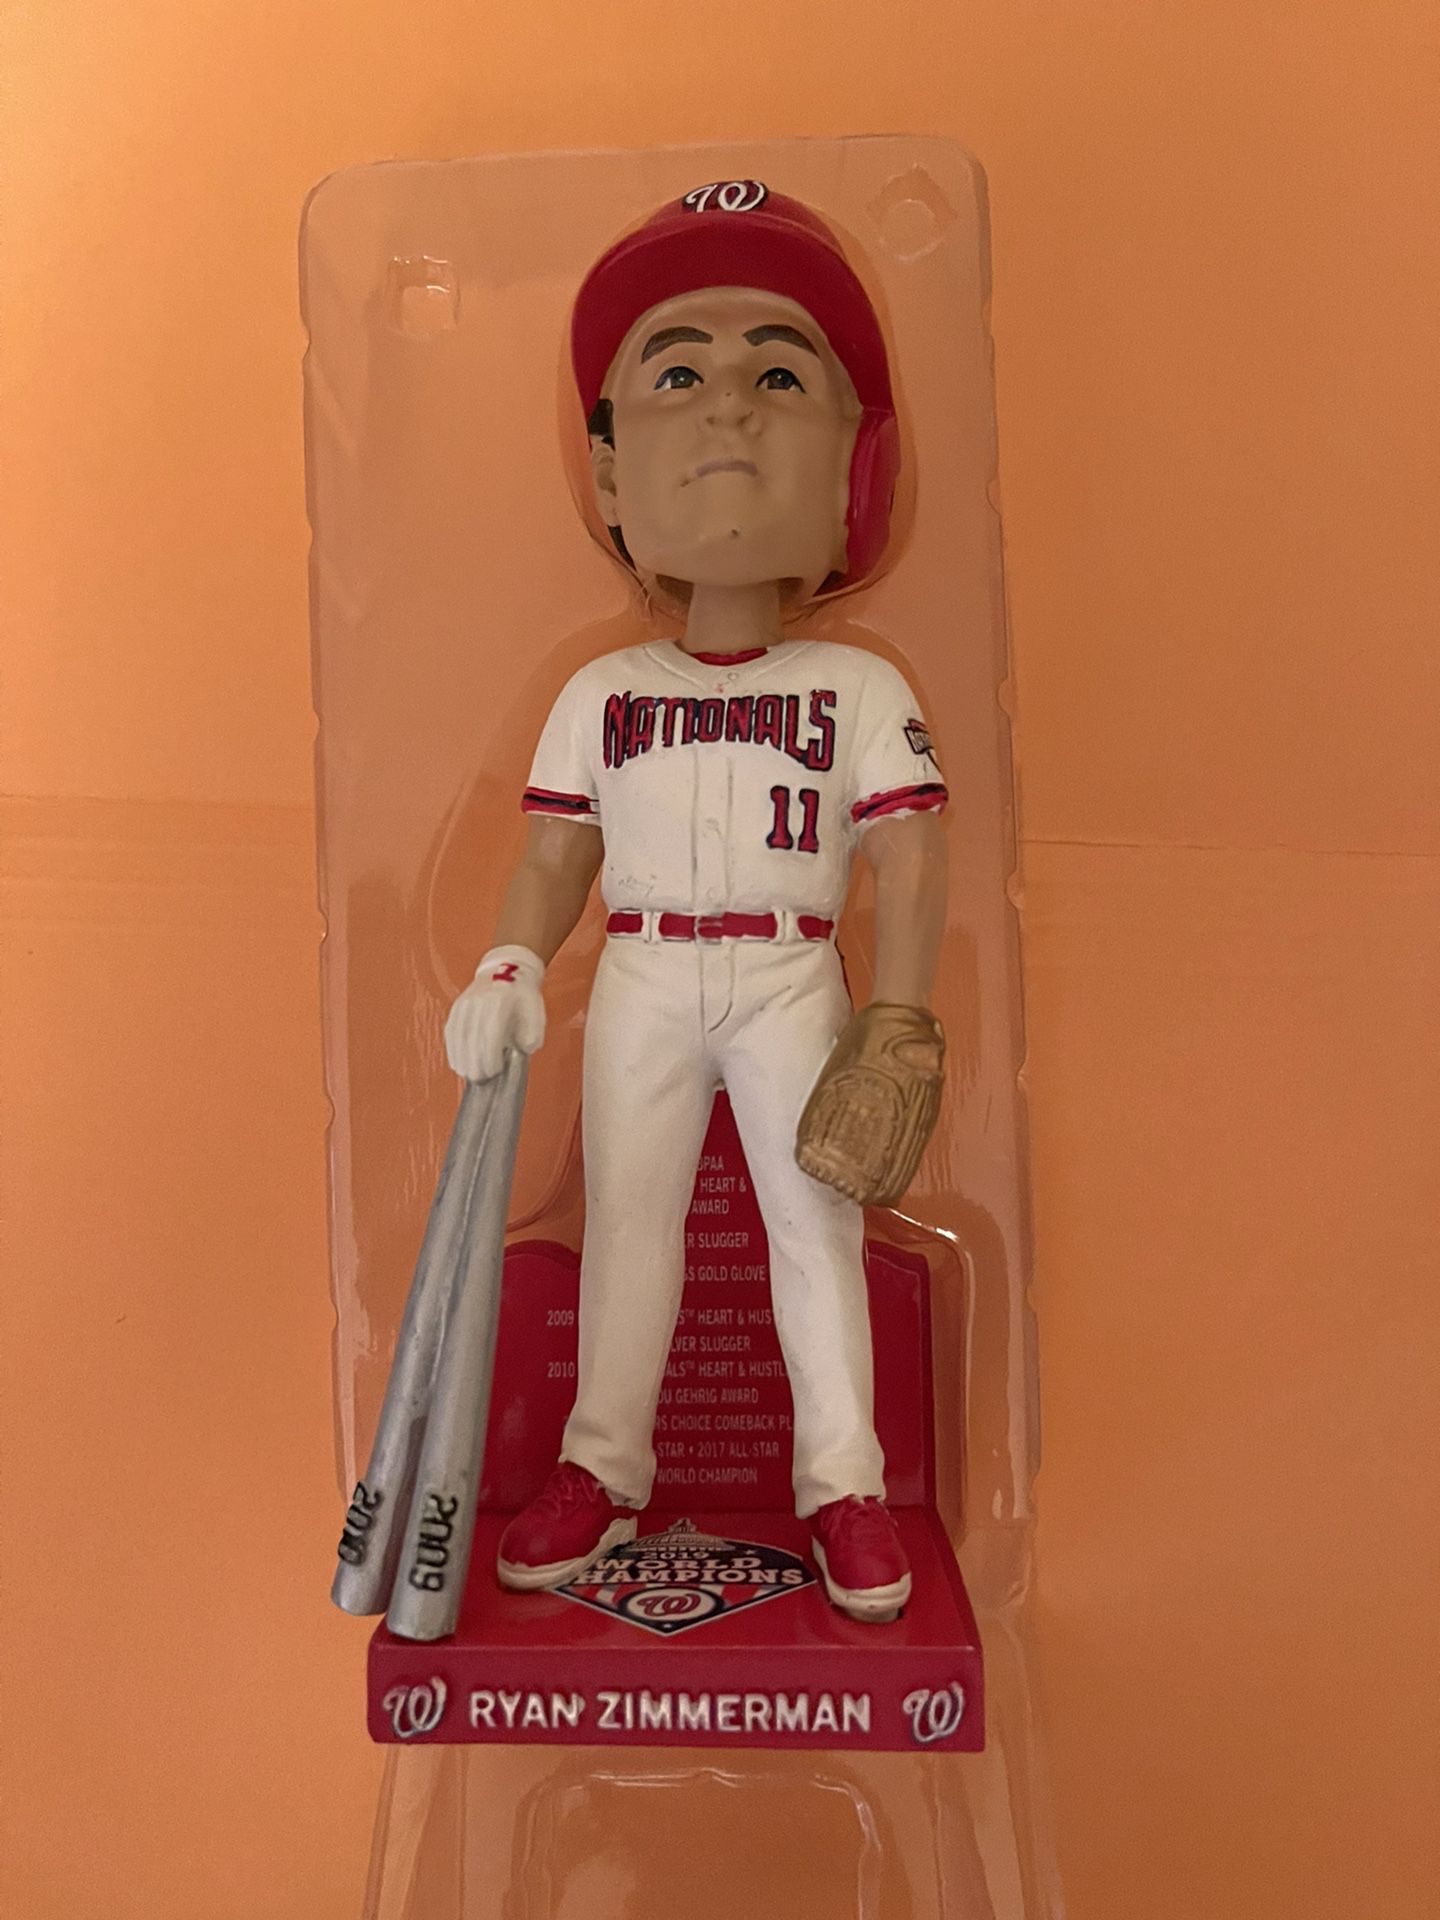 Ryan ZIMMERMAN 2021 WASHINGTON Nationals Bobblehead! Stadium Promotion  Give-A-Way! Excellent Piece for Your ZIMMERMAN Collection! for Sale in  Fairfax, VA - OfferUp